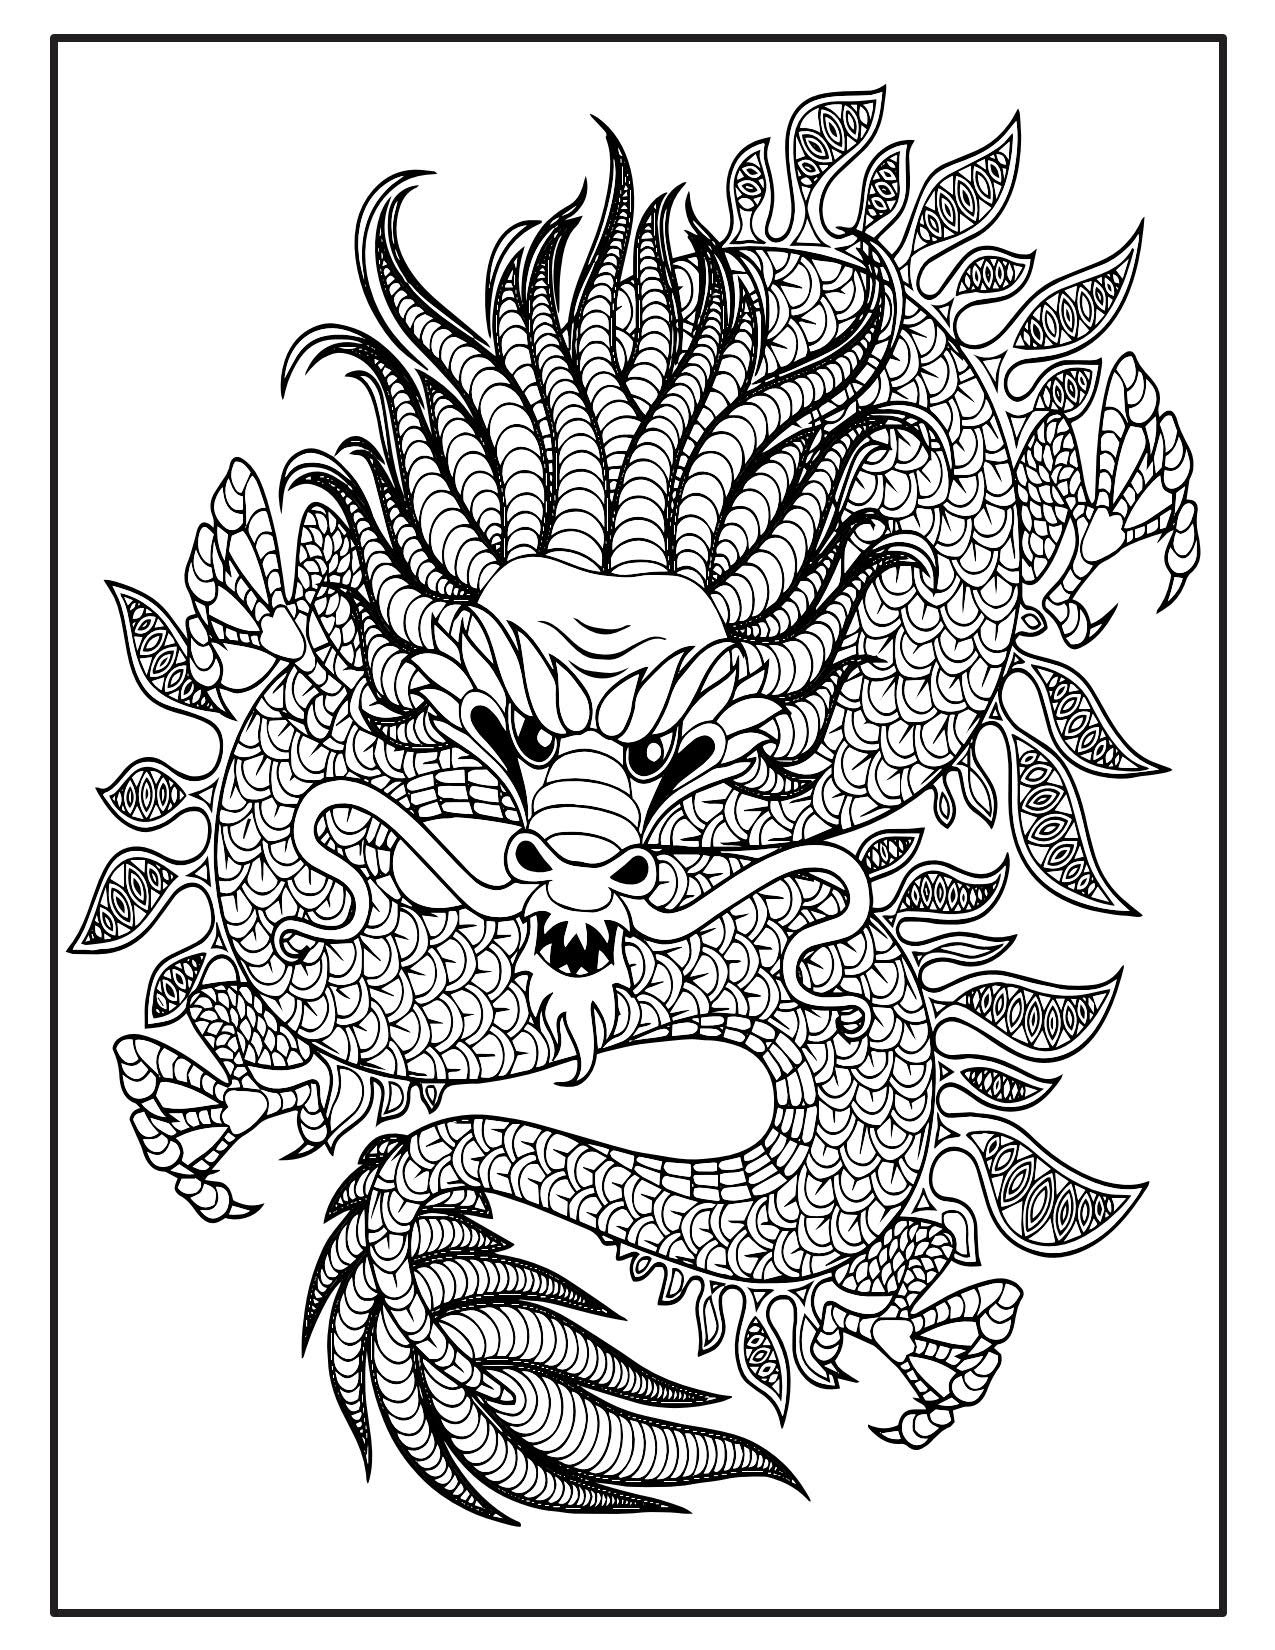 Dragons coloring book pages for adults